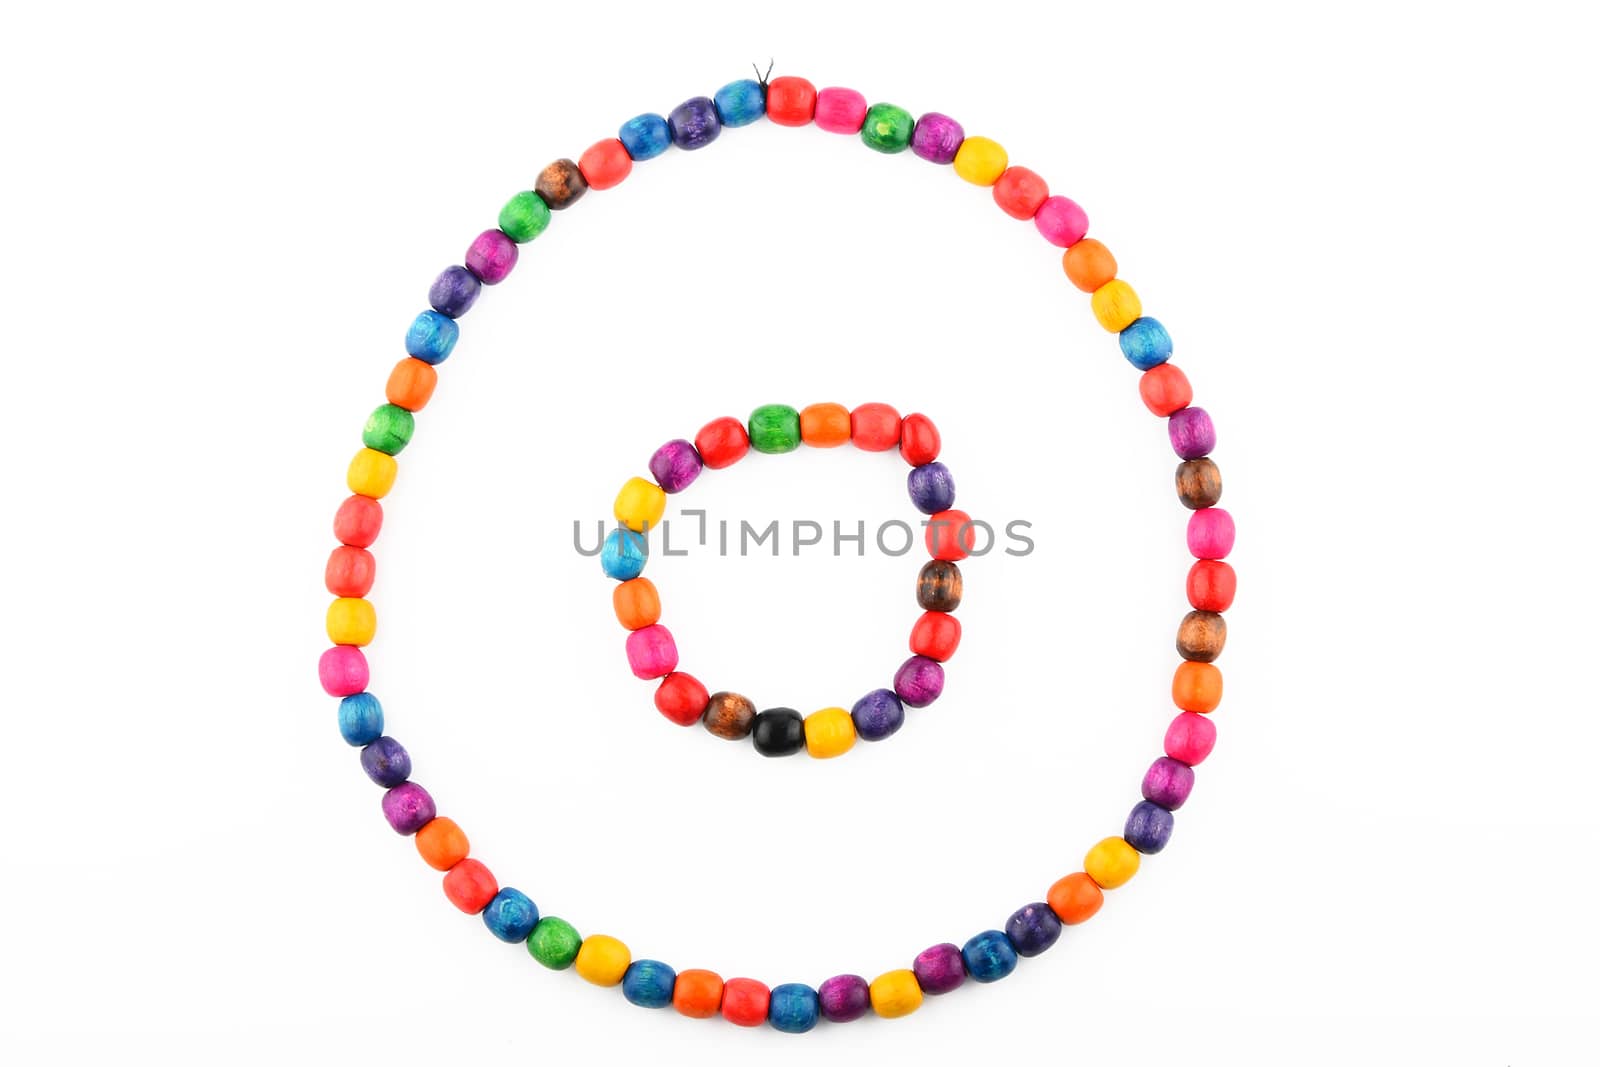 Colorful handmade wooden painted round beads necklace and bracelet isolated on white